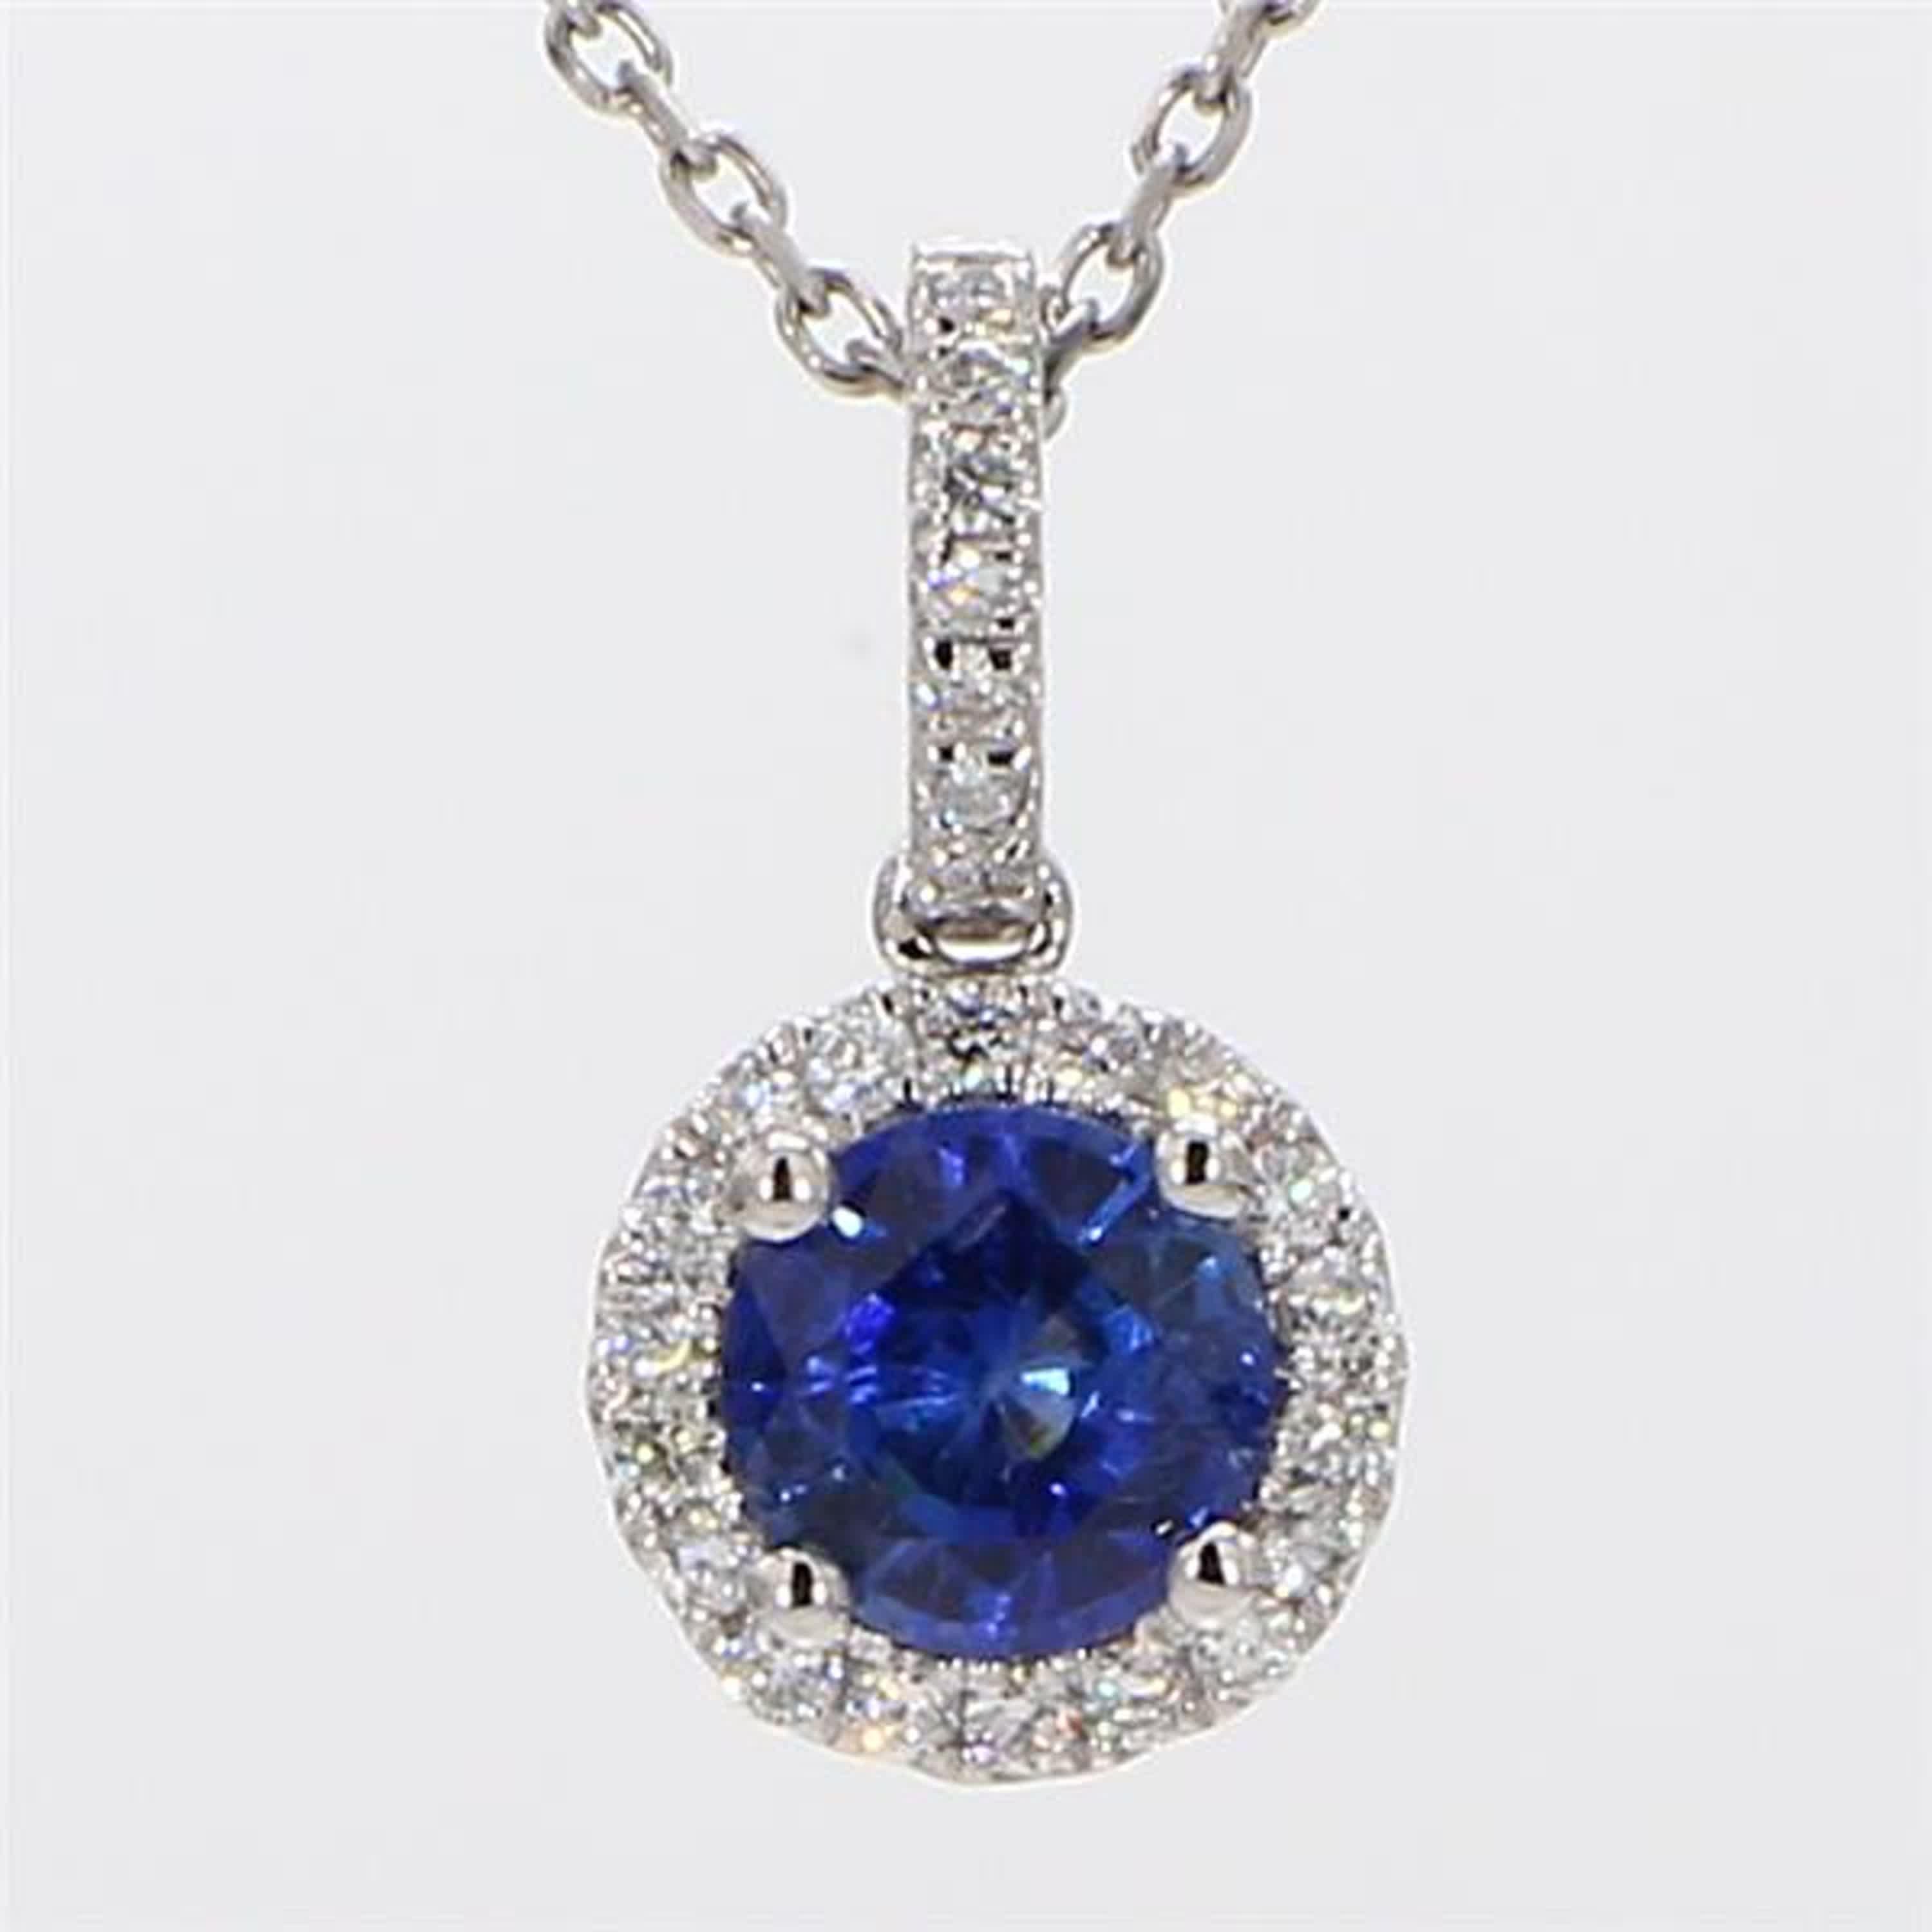 RareGemWorld's classic sapphire pendant. Mounted in a beautiful 14K White Gold setting with a natural round cut blue sapphire. The sapphire is surrounded by natural round white diamond melee in a beautiful single halo as well as throughout the